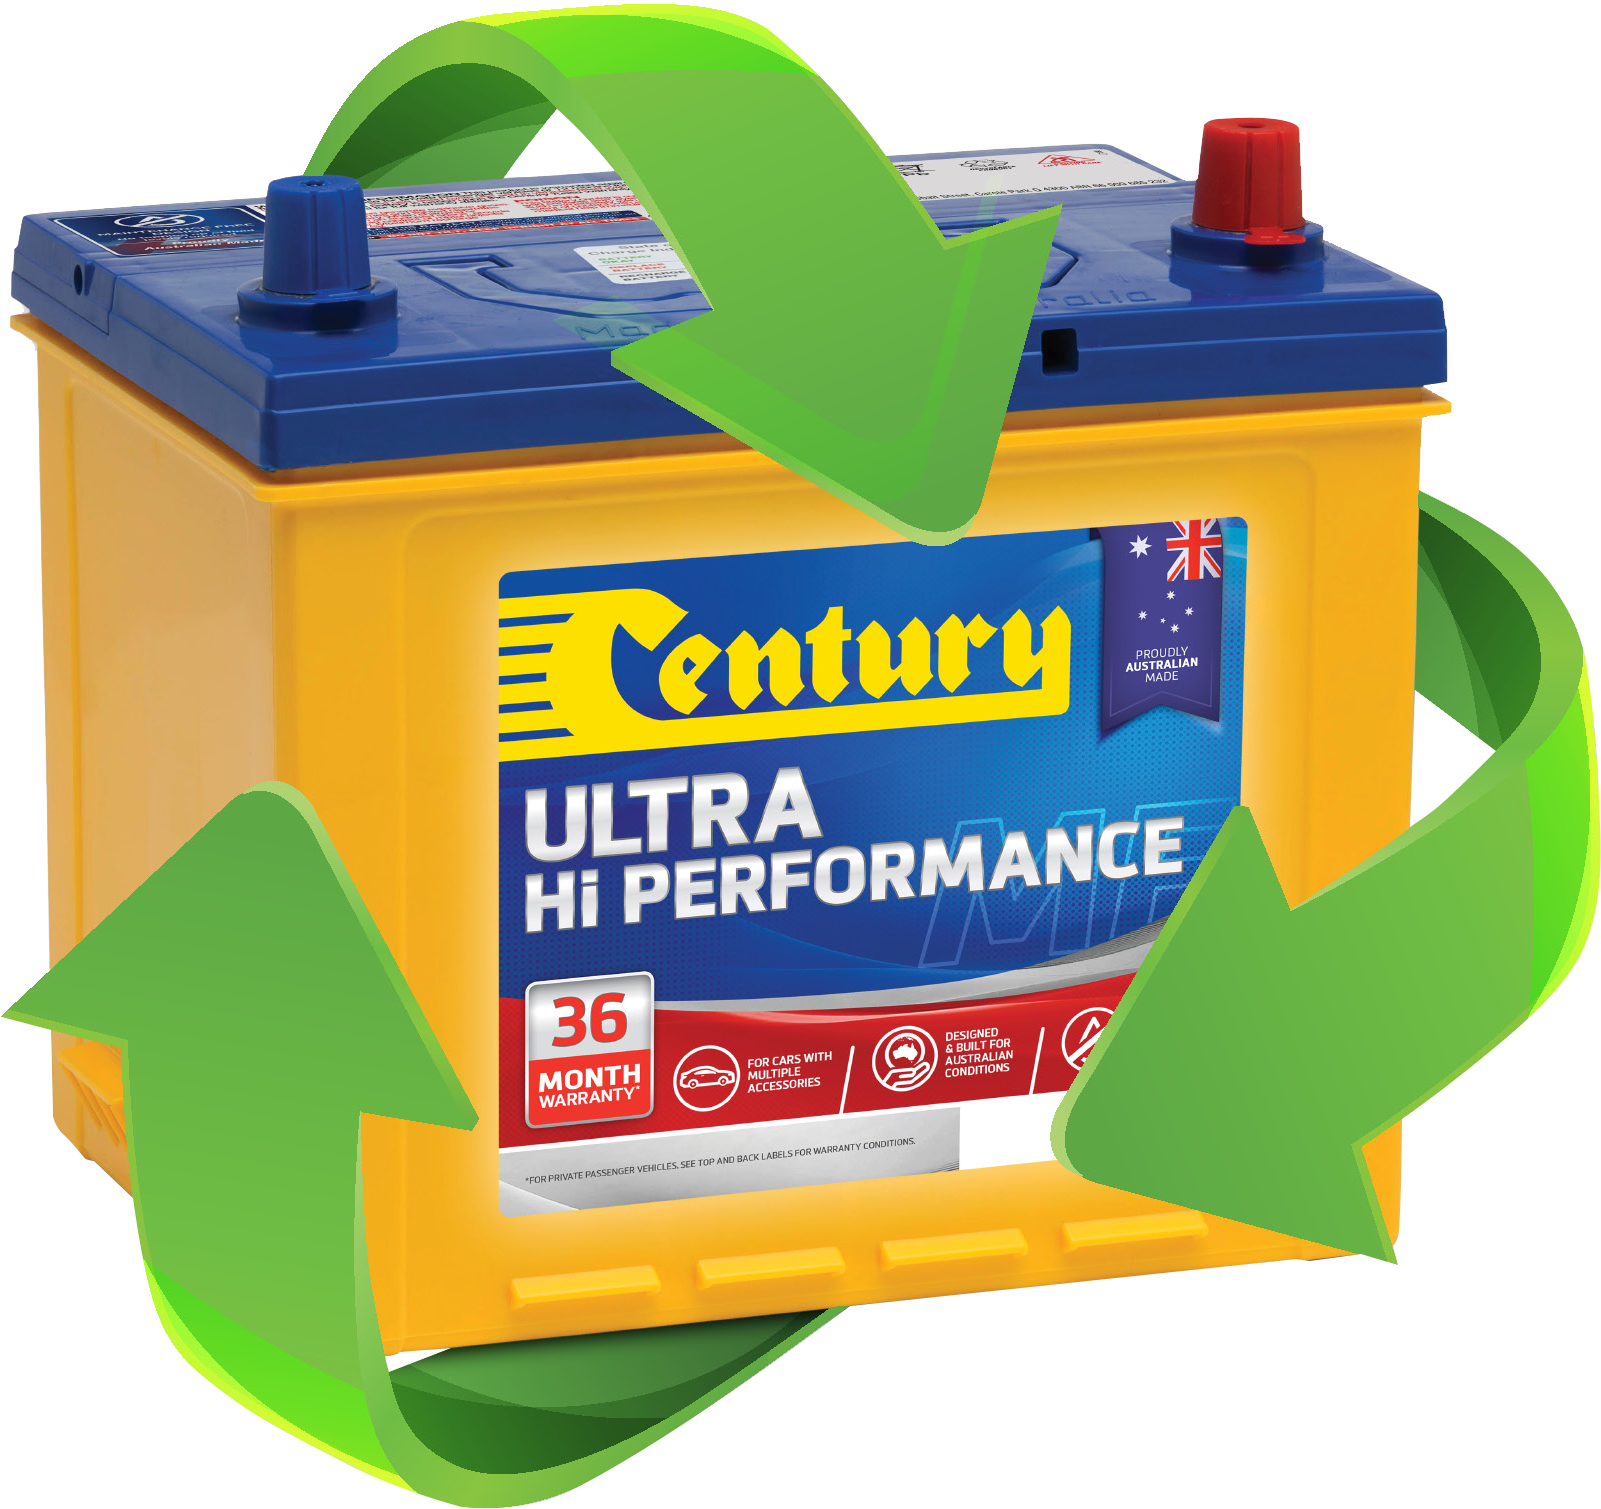 A century ultra hi performance battery with green arrows around it